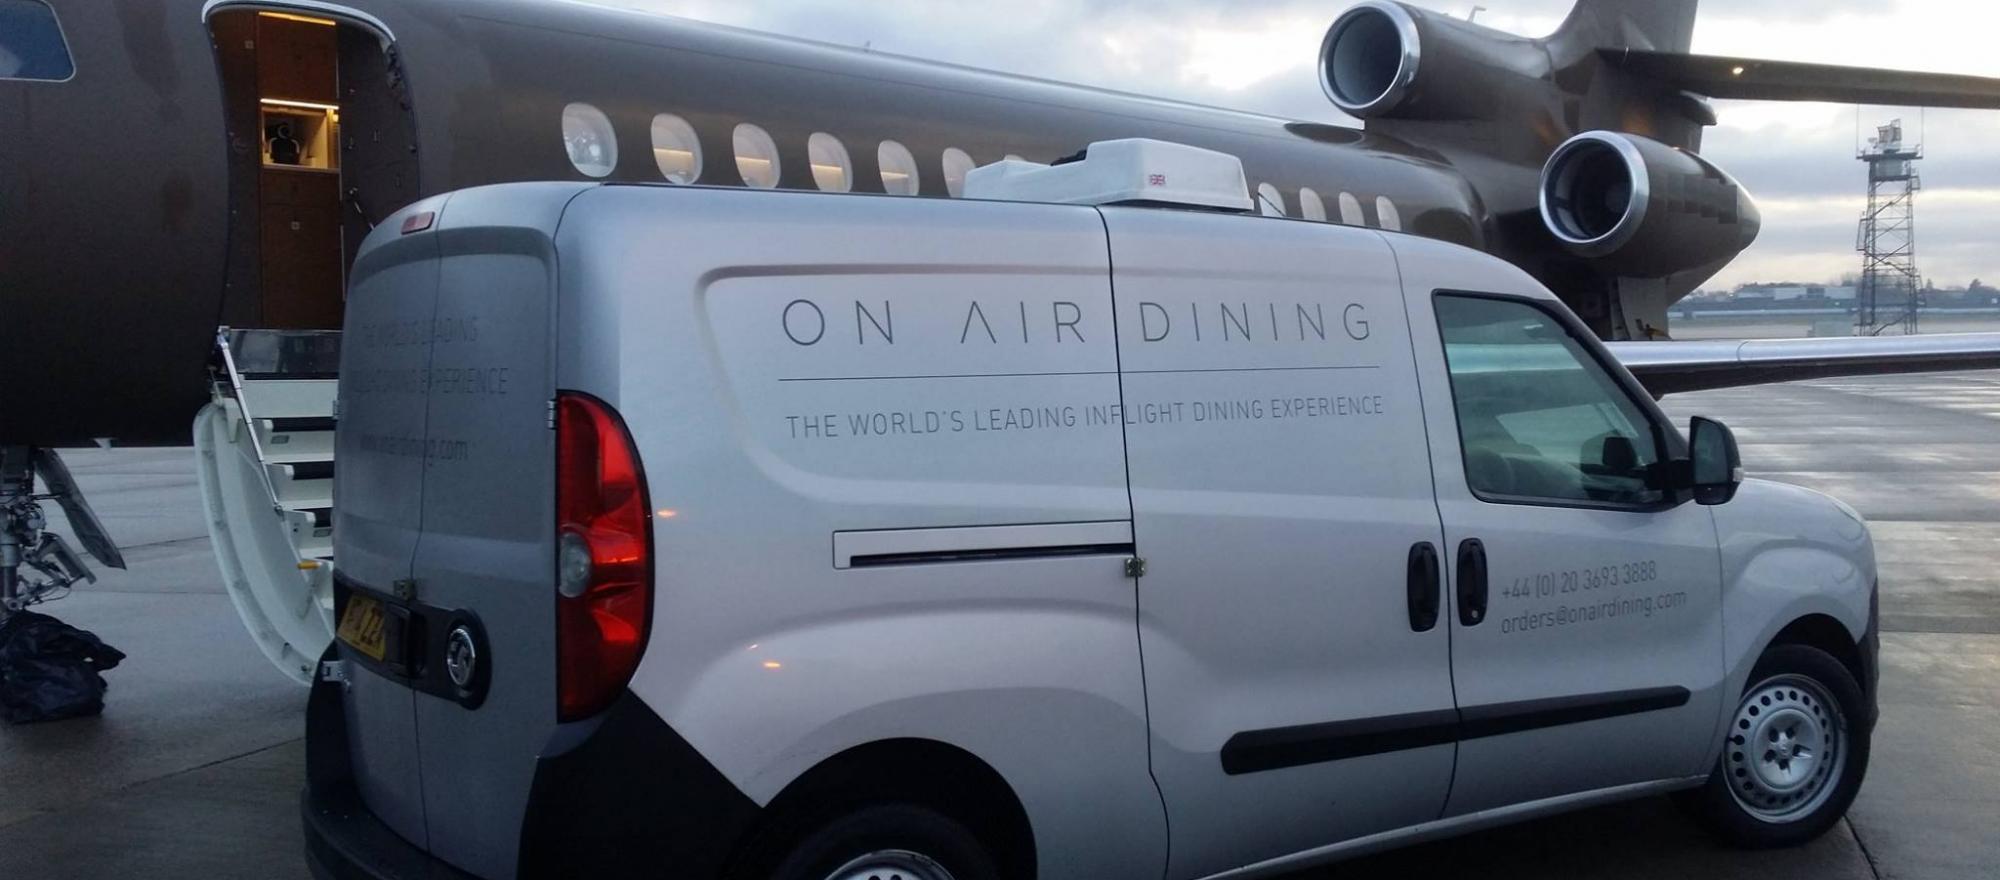 On Air Dining catering delivery van on airport ramp next to a Falcon business jet